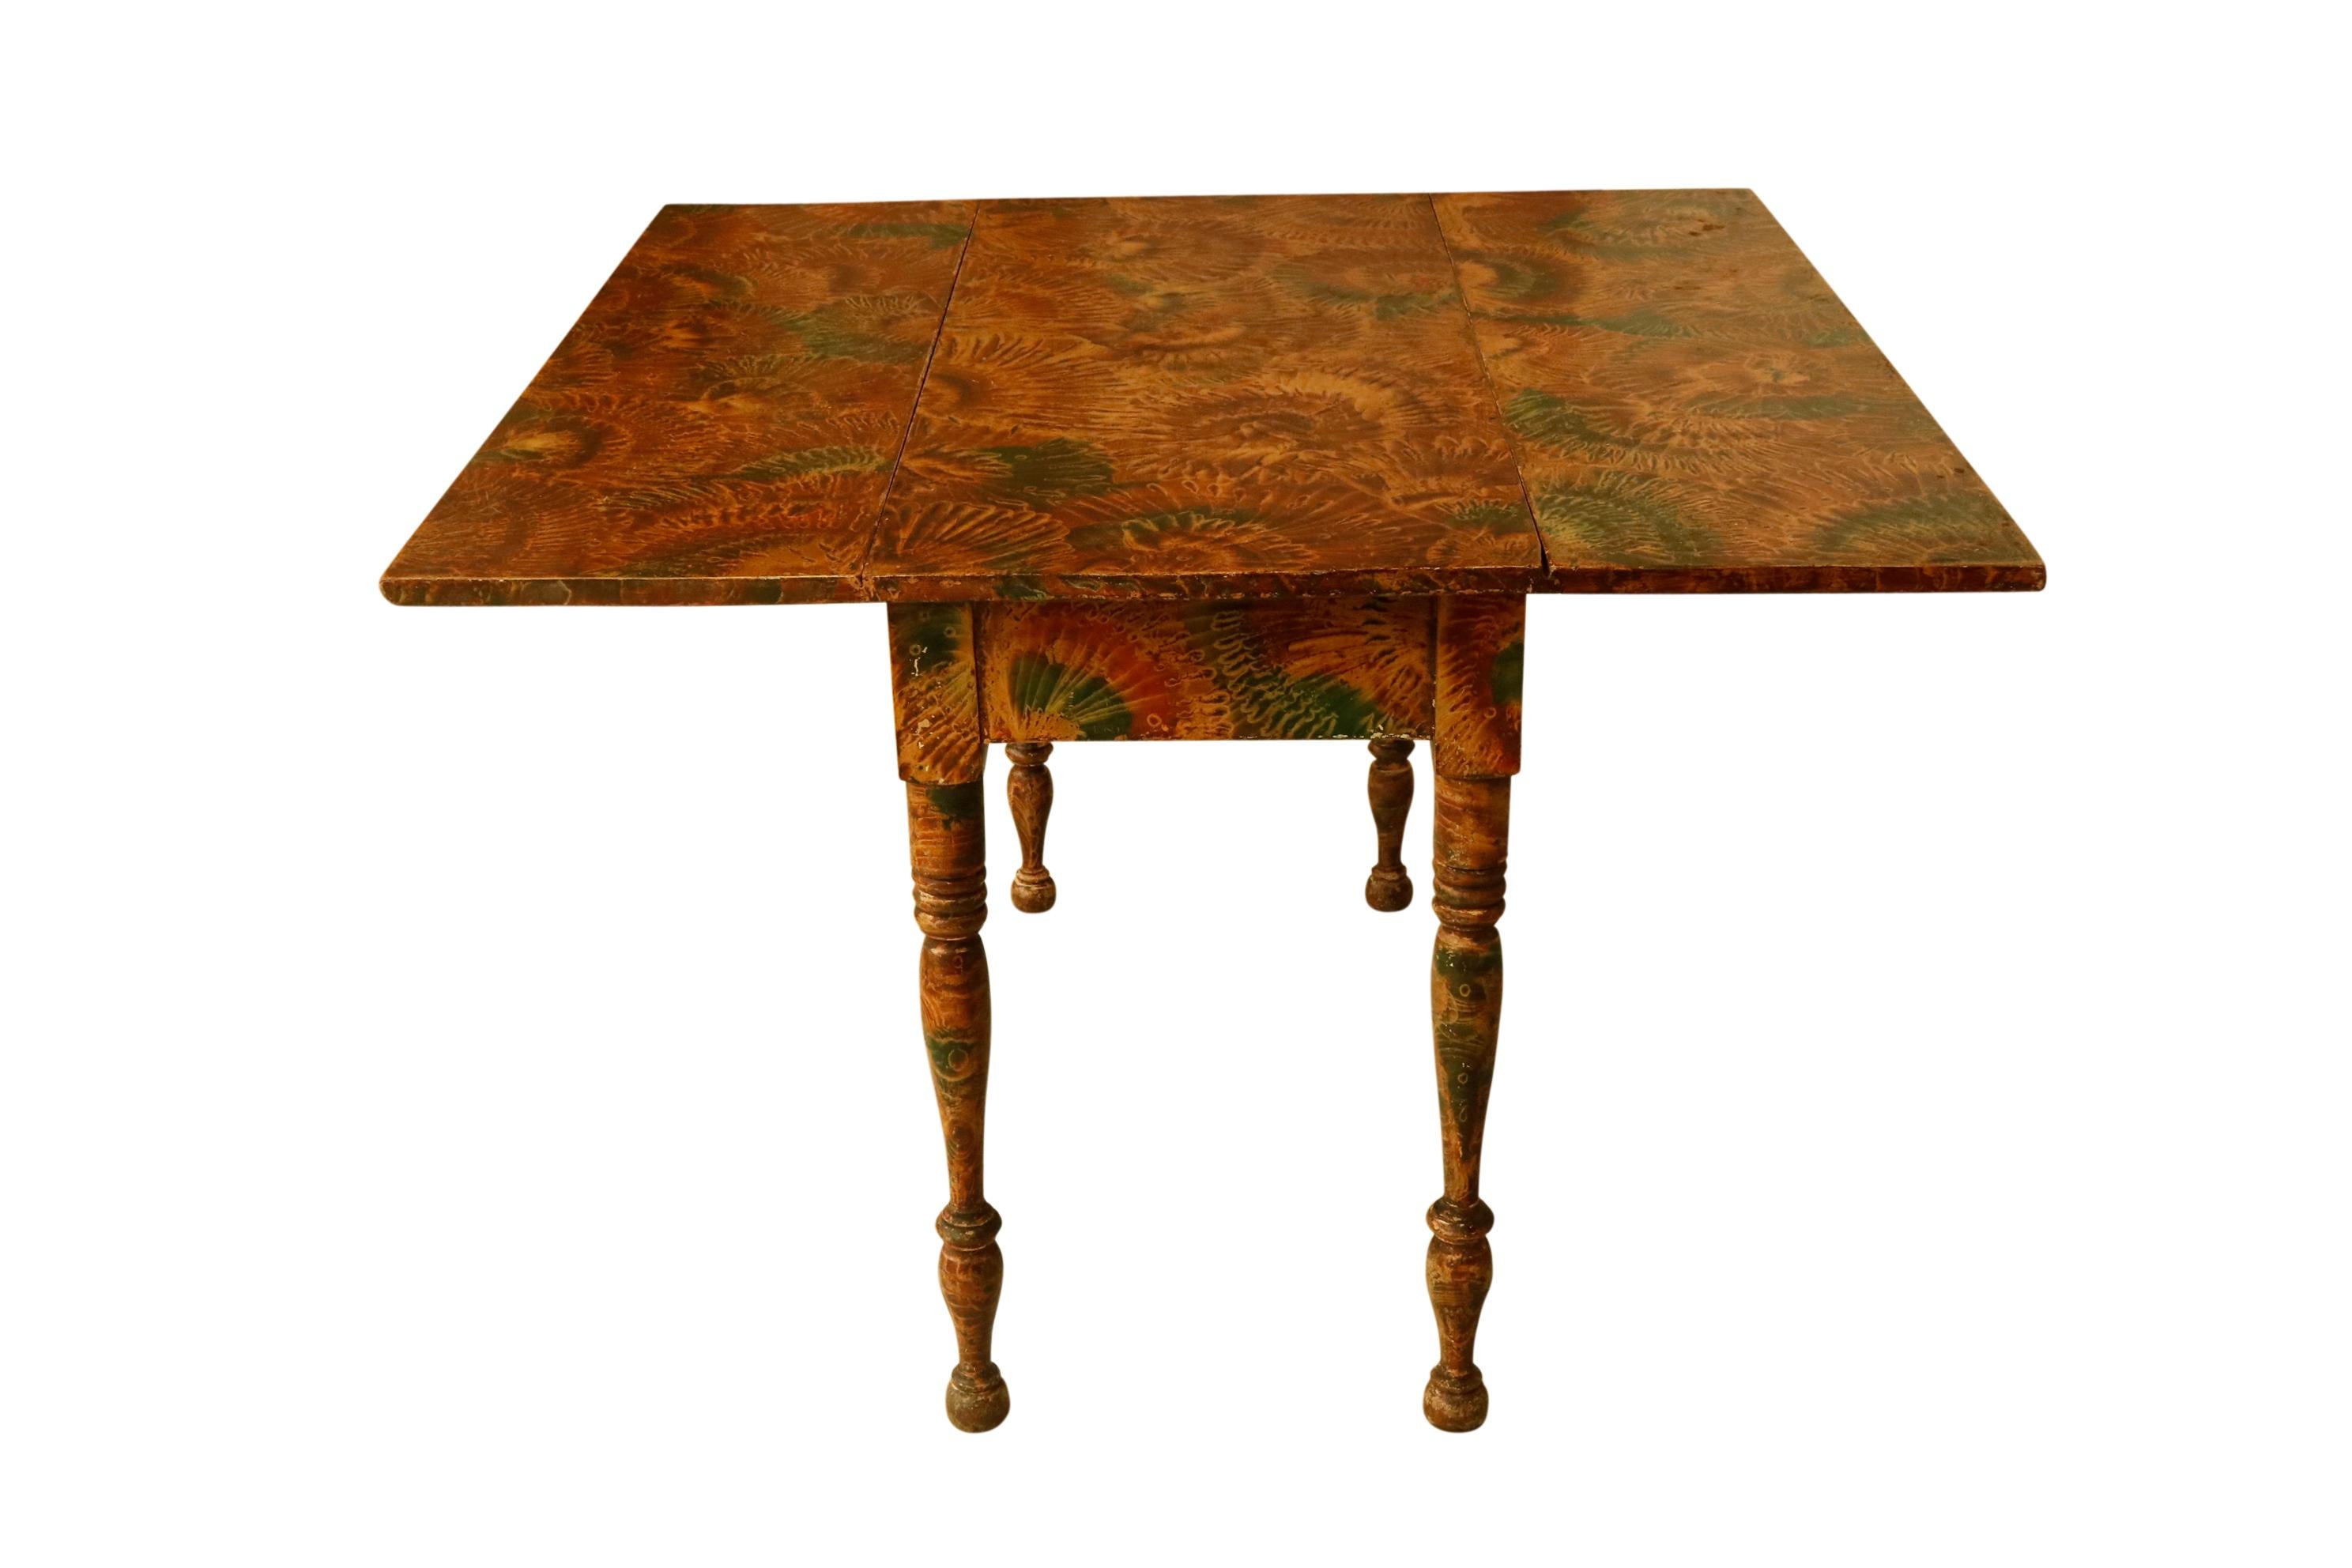 Hand-Painted Exquisitely Decorated 19th Century American Table For Sale